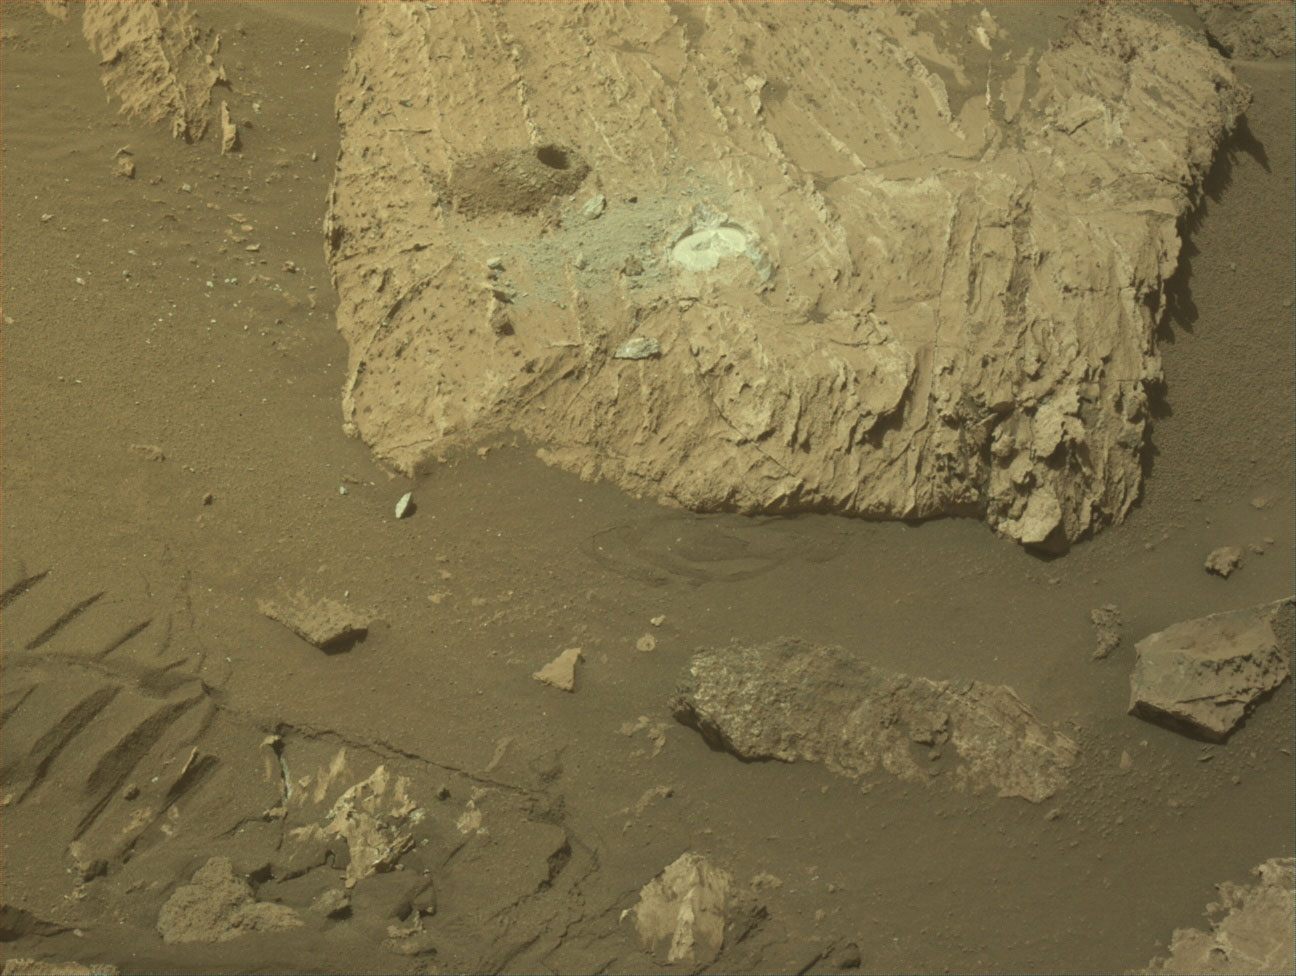 Image of a rock on Mars with a hole and patch next to each other of Mars Rock Sample 25.